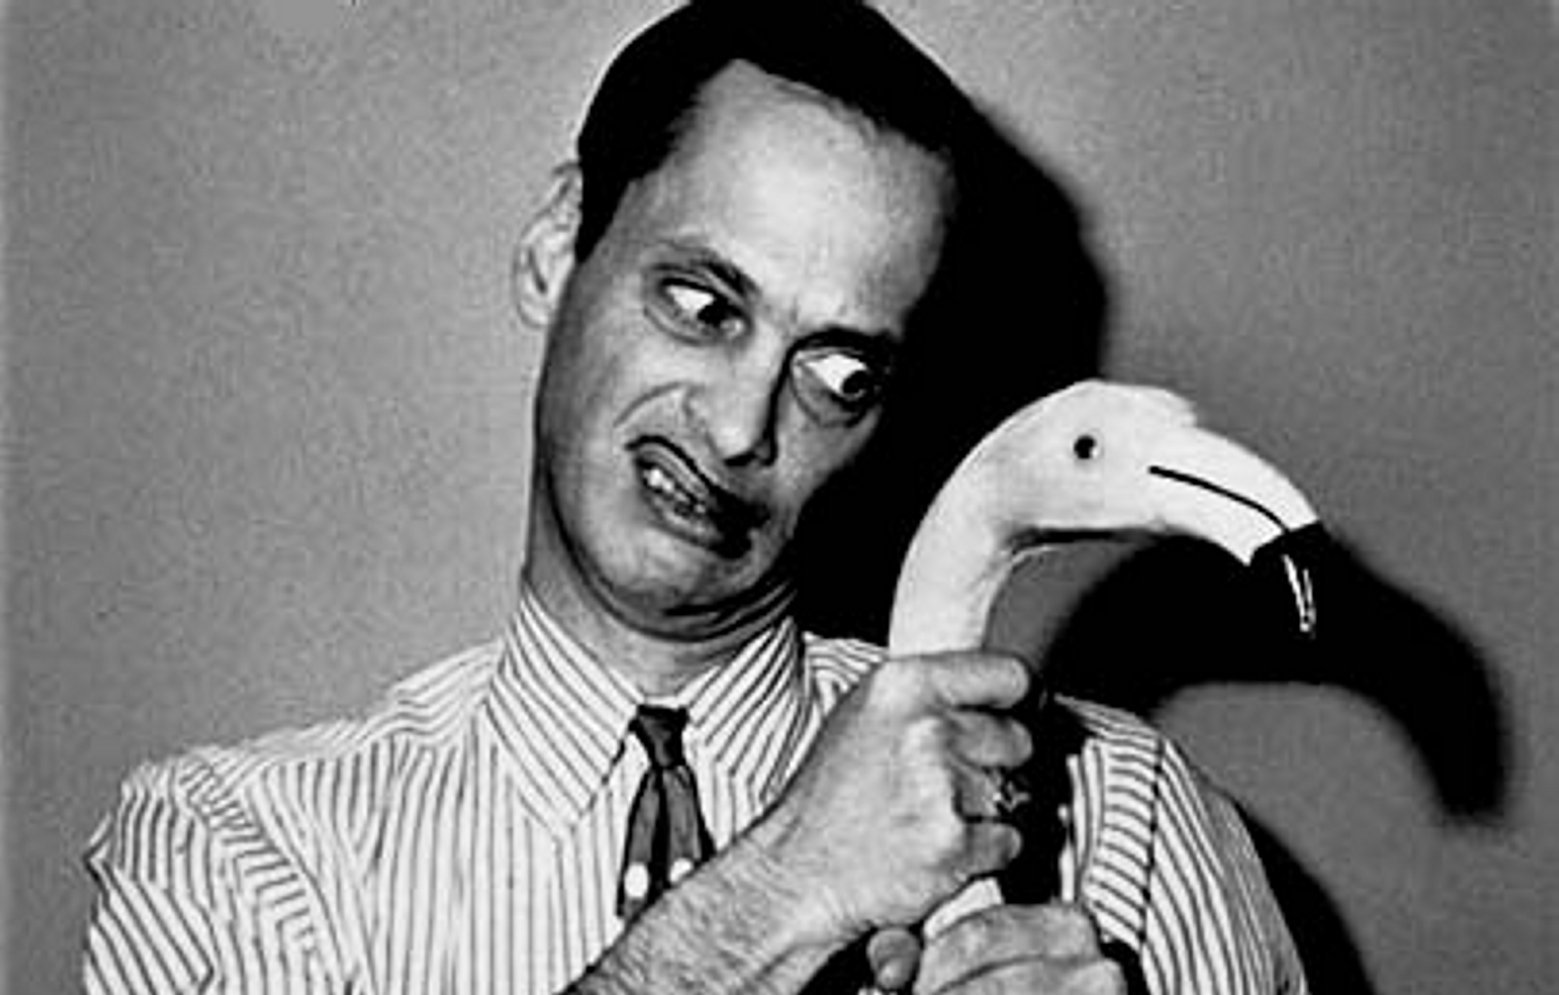 Happy birthday to the Pope of Trash himself, the idiosyncratic and iconic John Waters! 